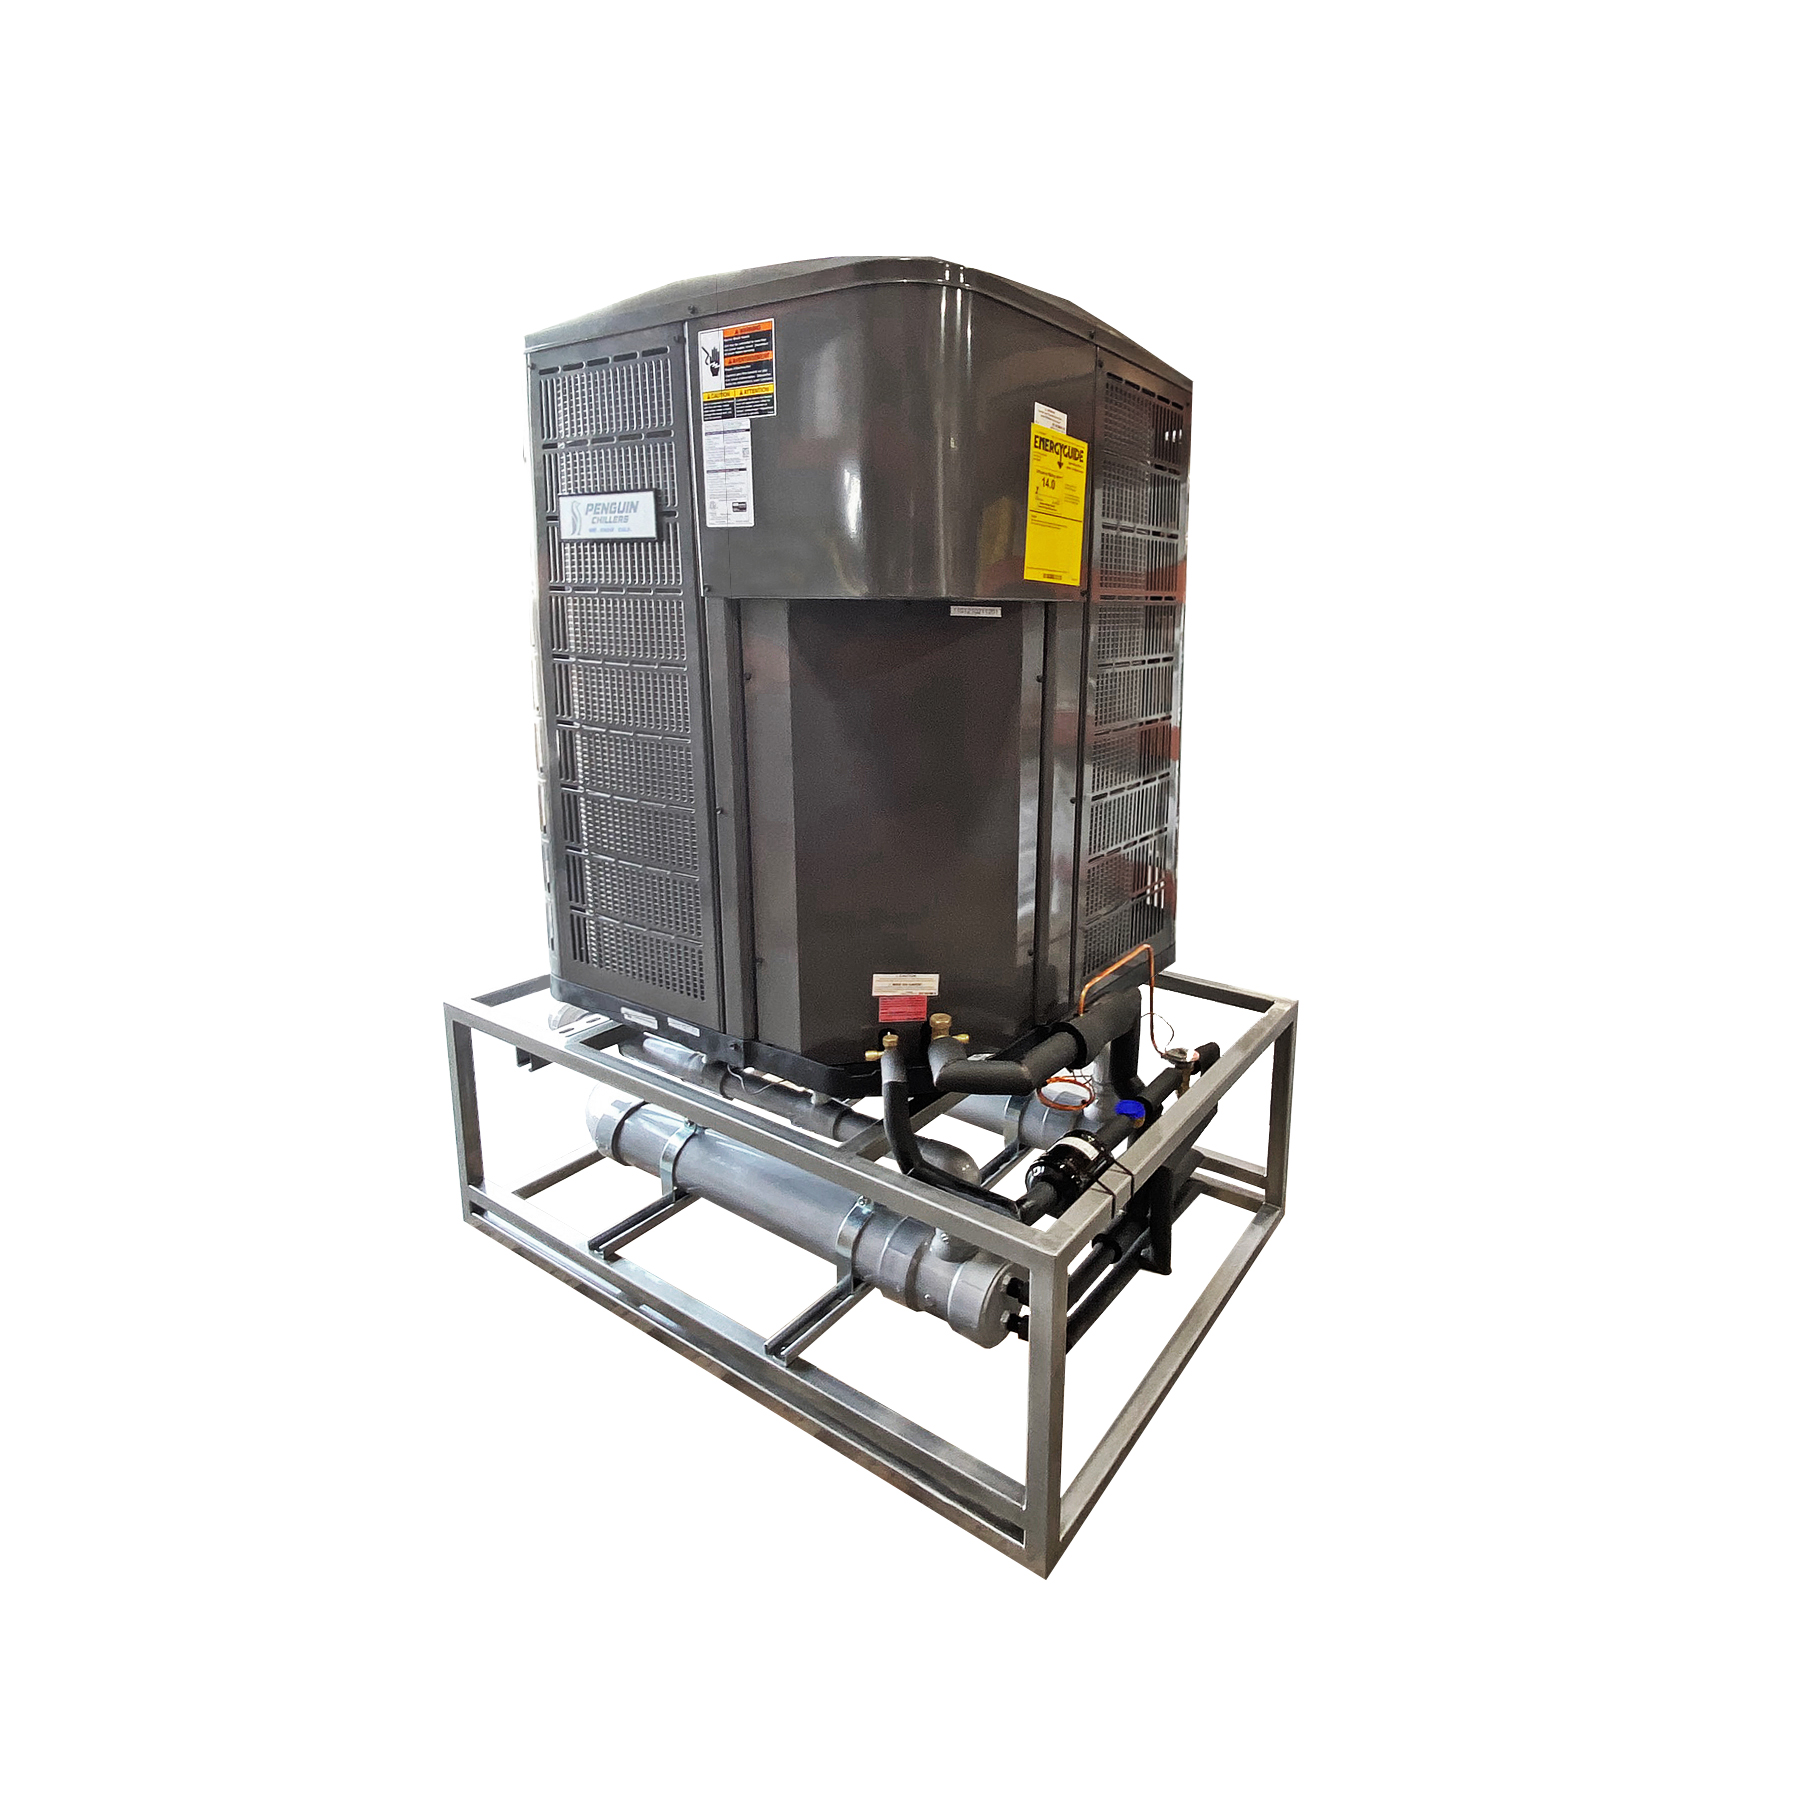 Chiller, Industrial Chiller, Water Chiller, Water Cooled Chiller